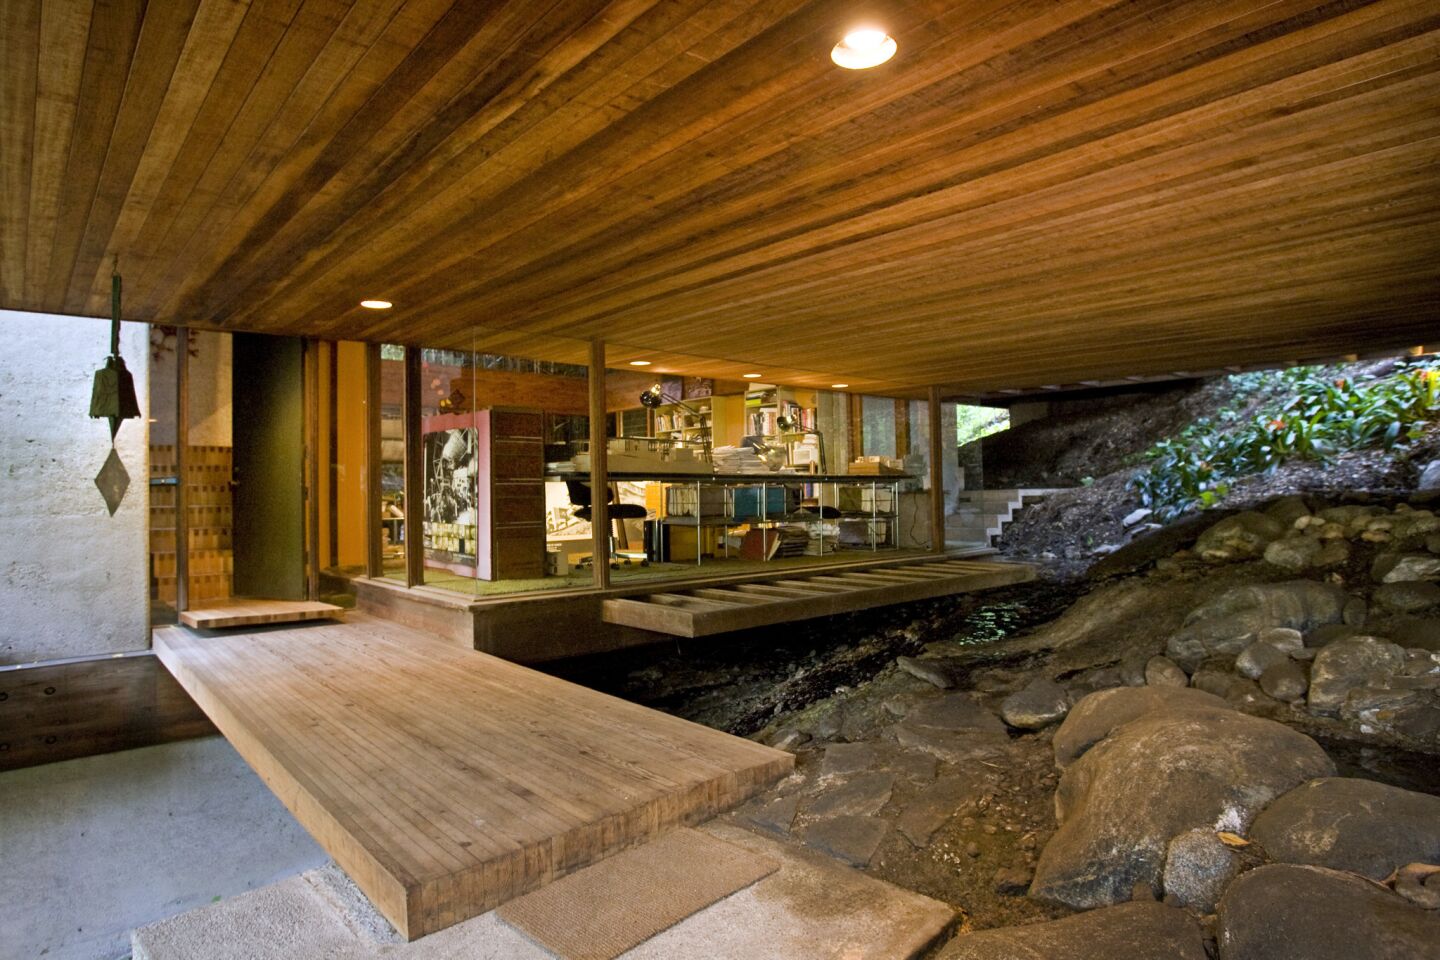 "Ray Kappe's house may be the greatest house in Southern California," said Stephen Kanner, past president of the L.A. chapter of the American Institute of Architects. "It's so creative, not only in the way he's sited it and the floor plan but the way light moves through the space, the way it hovers up and isn't pushed into the ground like most houses on slopes." Kappe used large rectangular concrete pillars to support the wood foundation beams, and the 4,000-square-foot house seems to float. "It constantly relates back to the hillside outside," panelist Ron Radziner said. "It's the quintessential tree house." Kappe, a founder of the Southern California Institute of Architecture, said: "I always appreciated Wright, but I didn't try to copy him. We were lighter on the landscape than that."